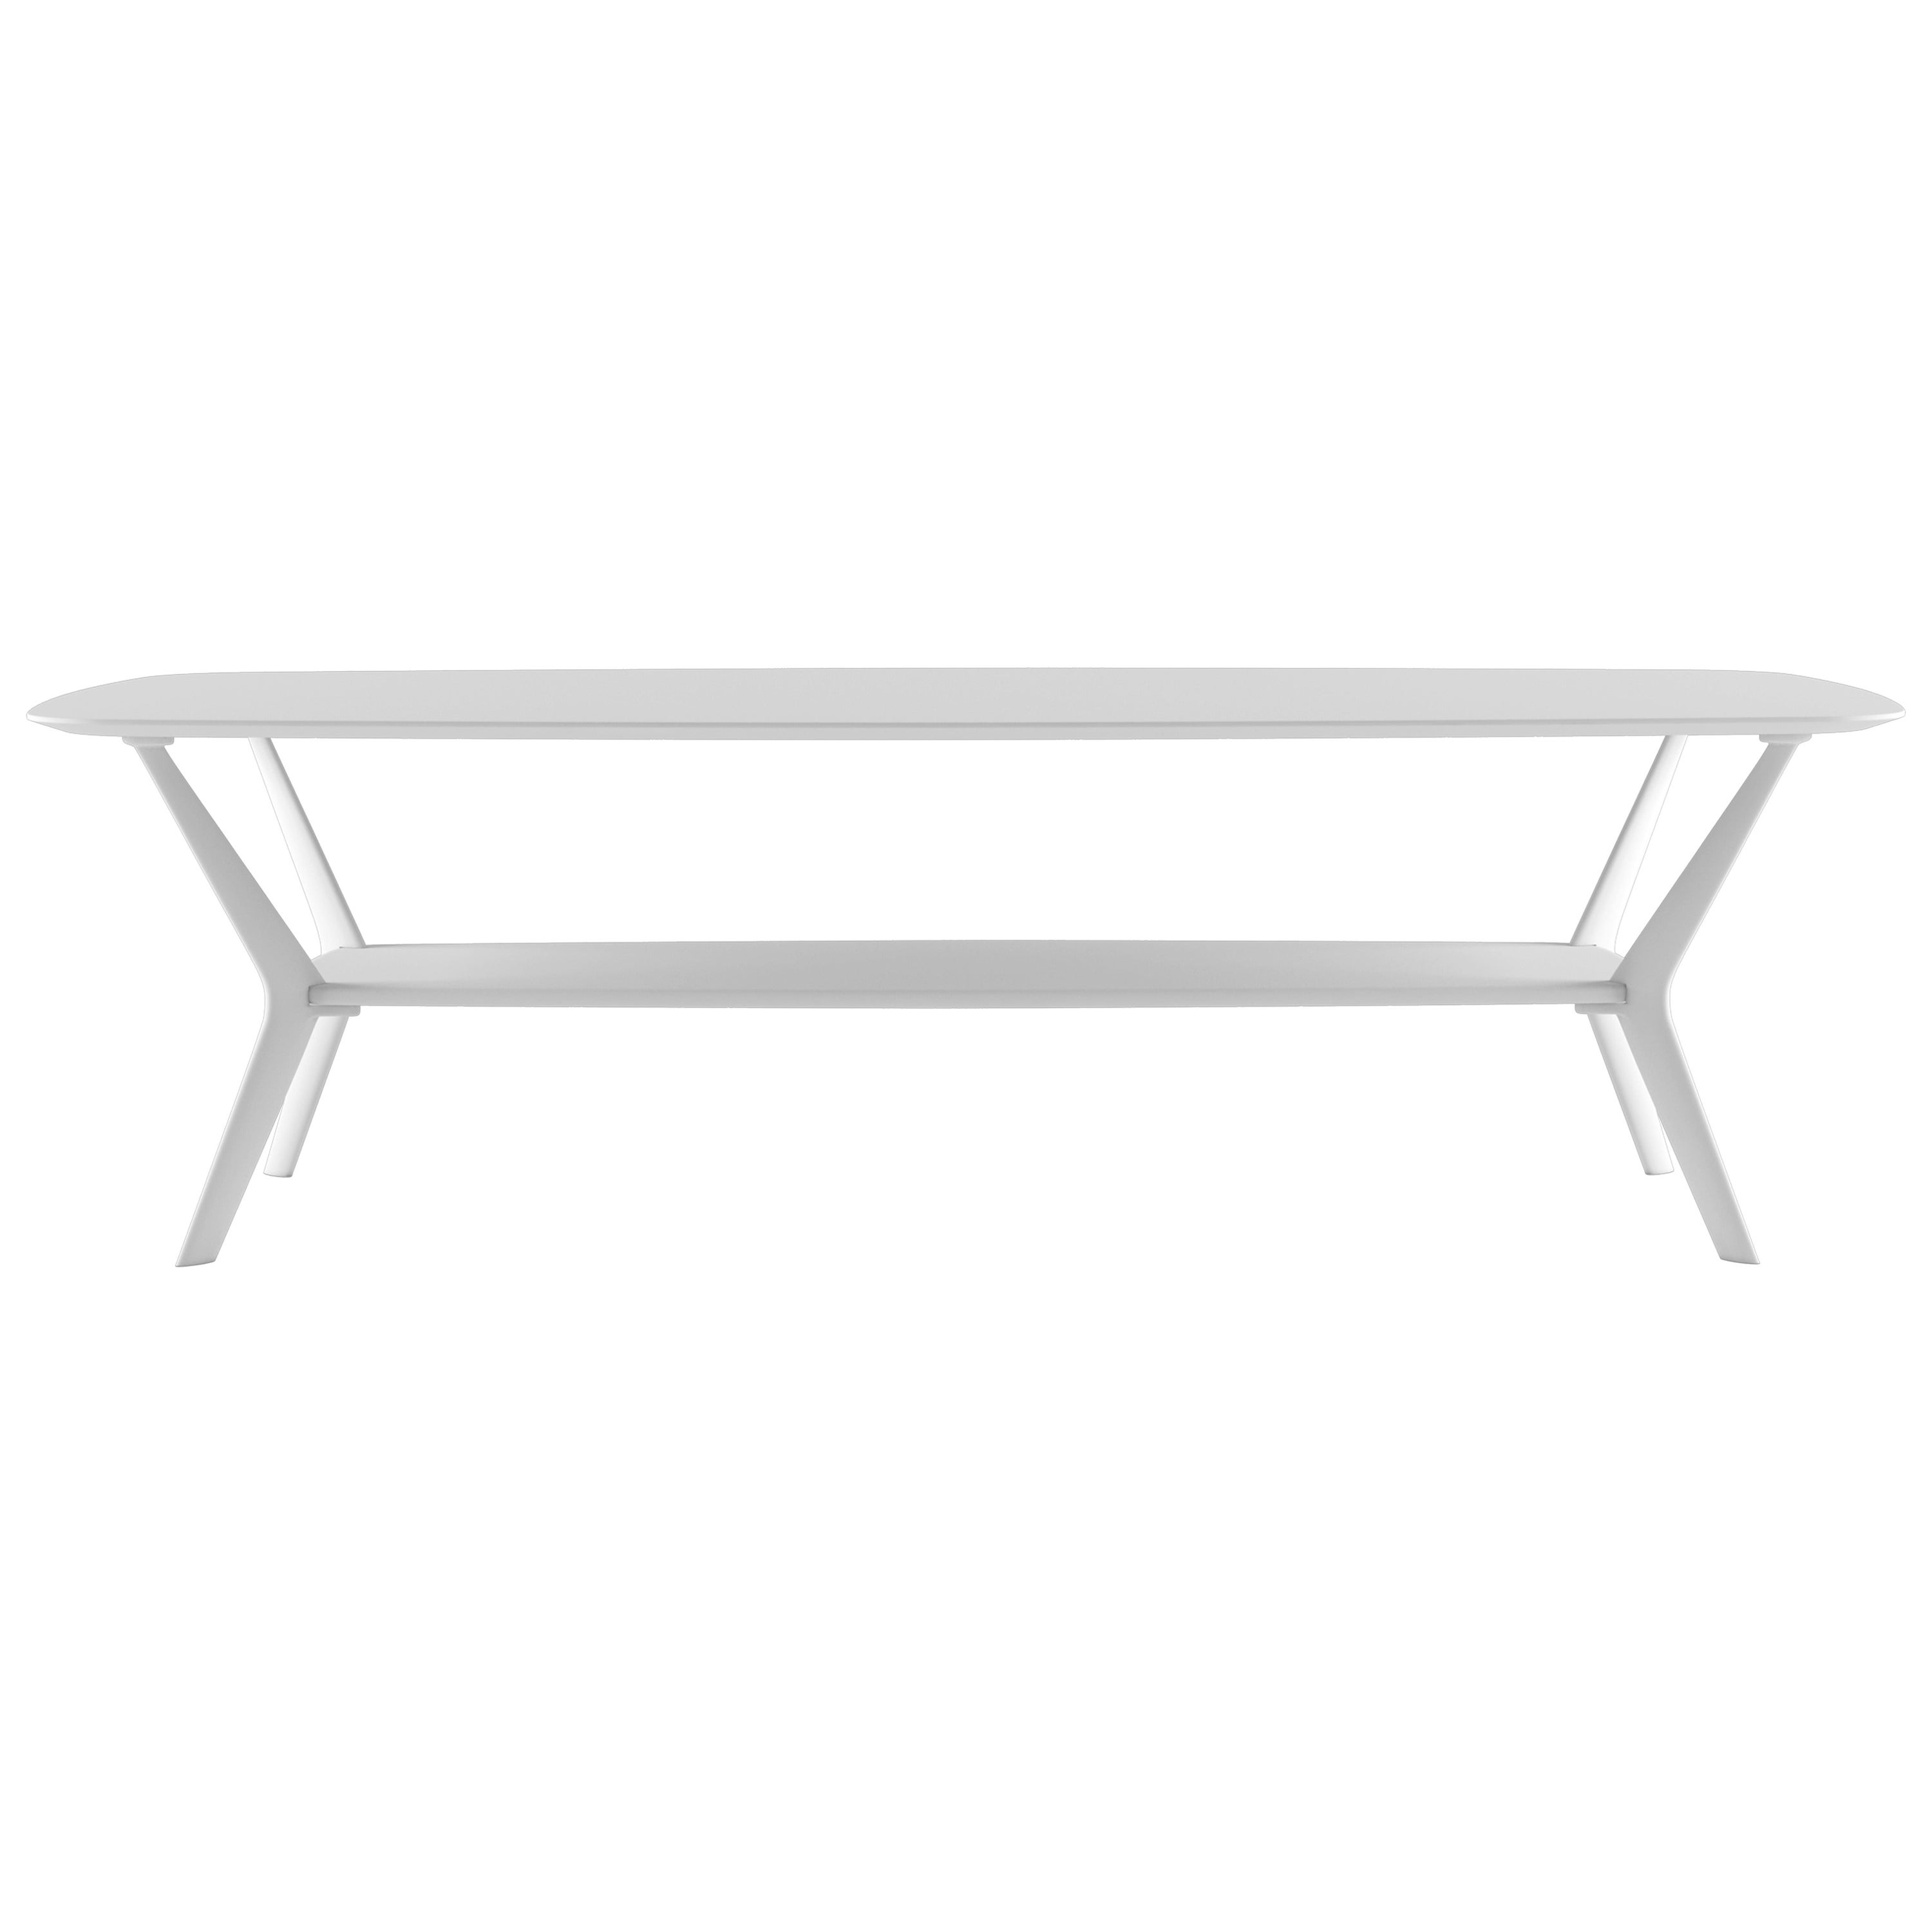 Alias B06 Biplane XS 60x120 Outdoor Table in White Top and Lacquered Frame For Sale